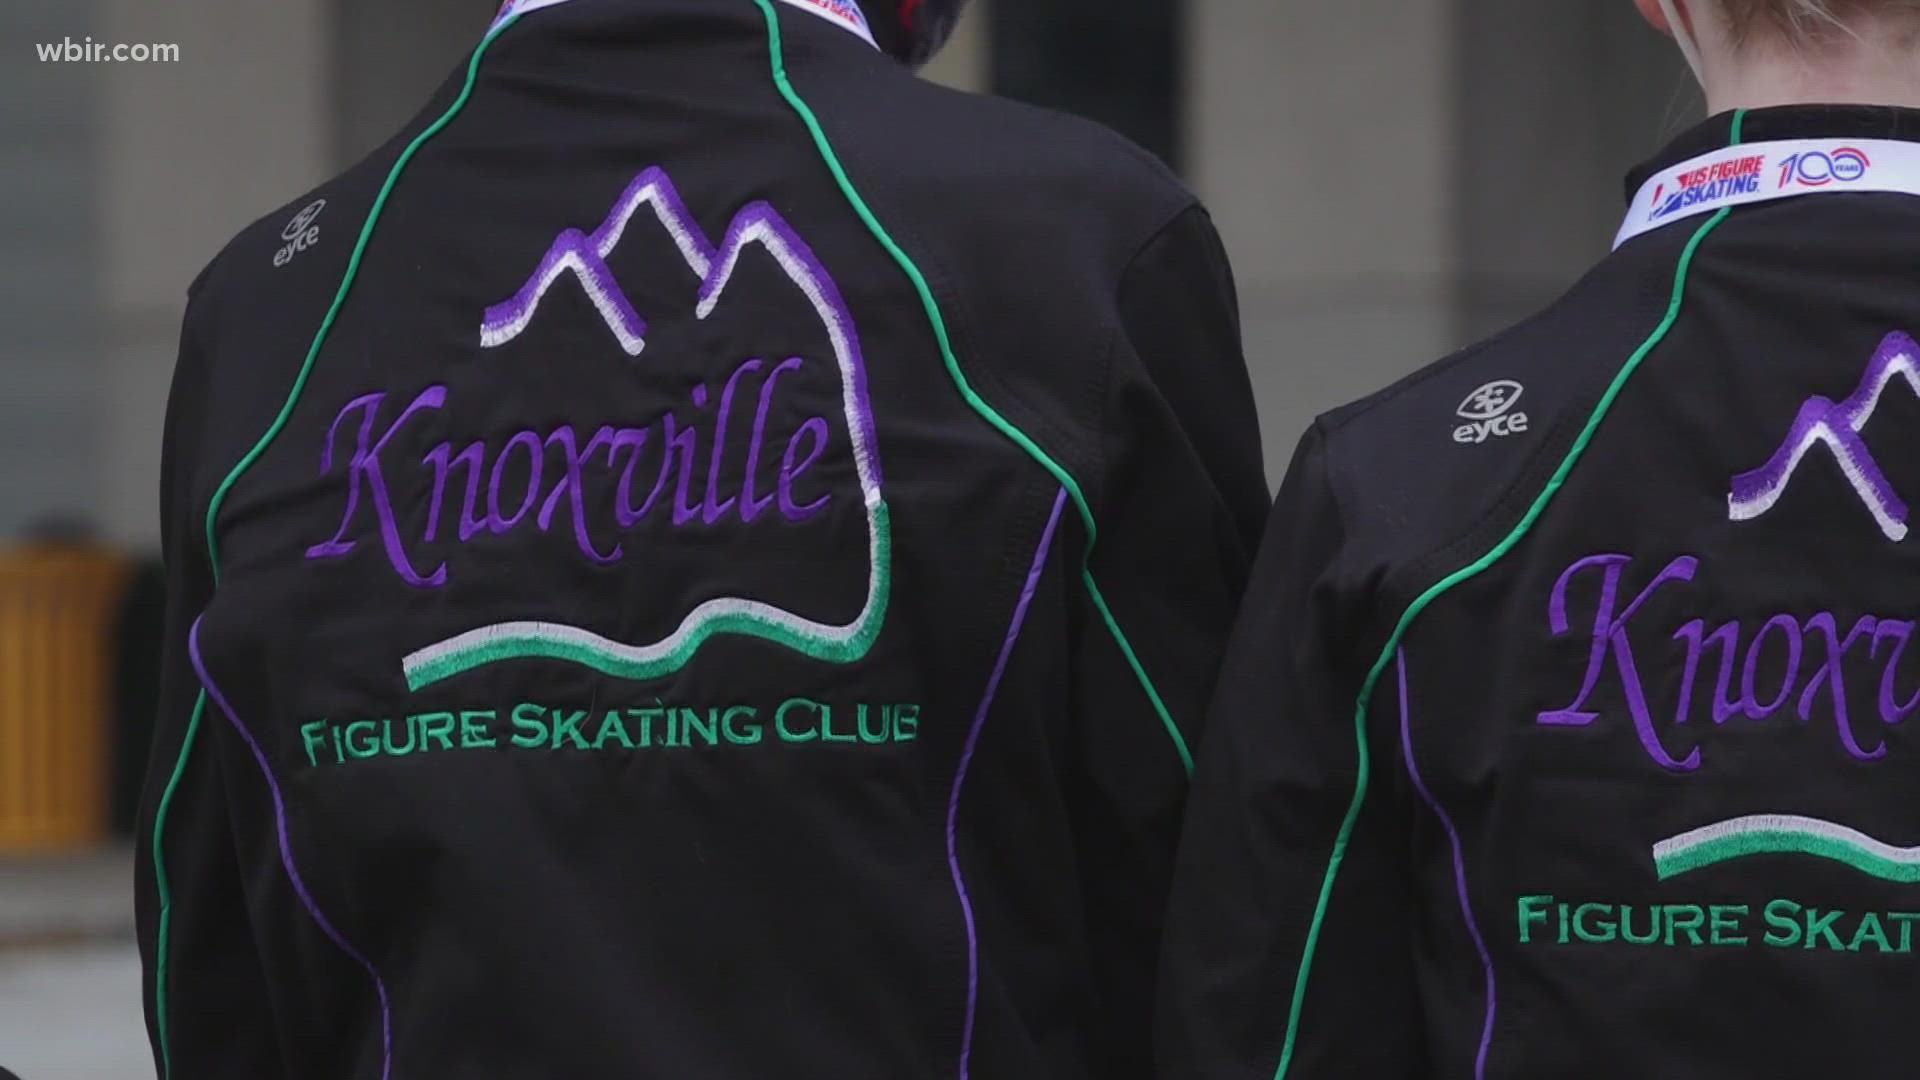 Local Knoxville skaters got to skate alongside Olympic hopefuls during the US Figure Skating National Championship in Nashville.